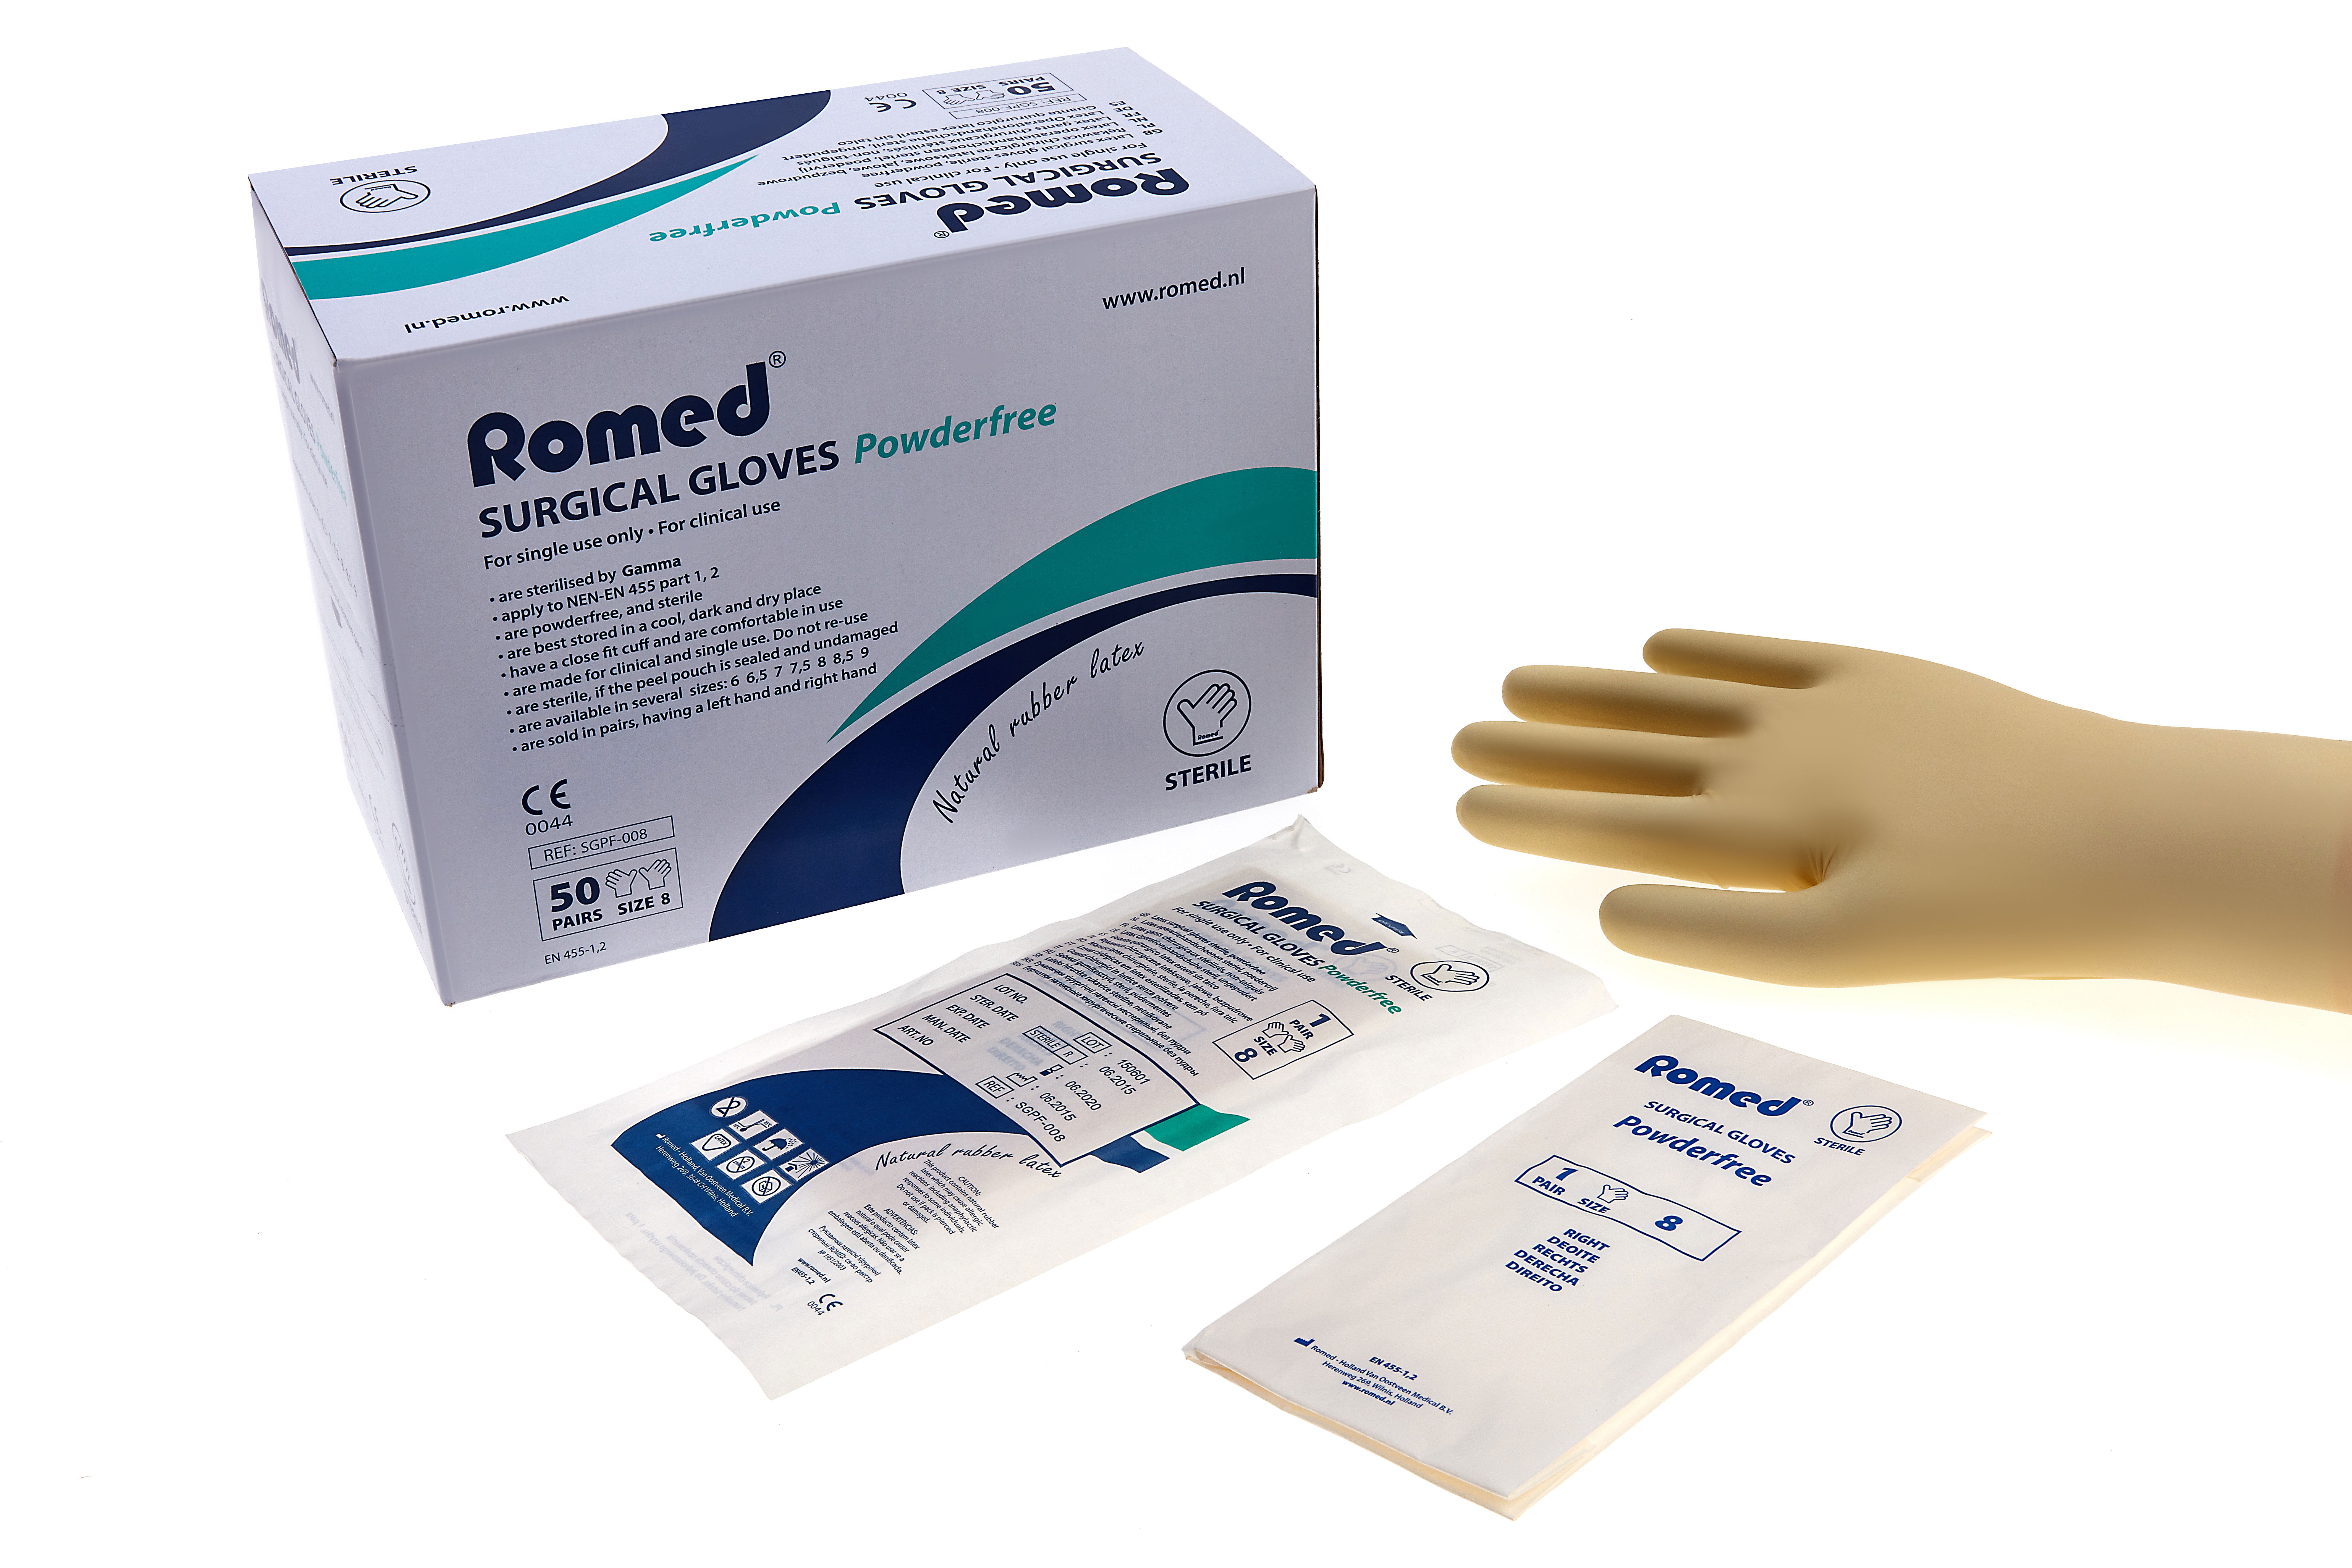 SGPF-008 Romed latex surgical gloves, powderfree, size 8, sterile per pair, 50 pairs in an inner box, 5 x 50 pairs = 250 pairs in a carton.